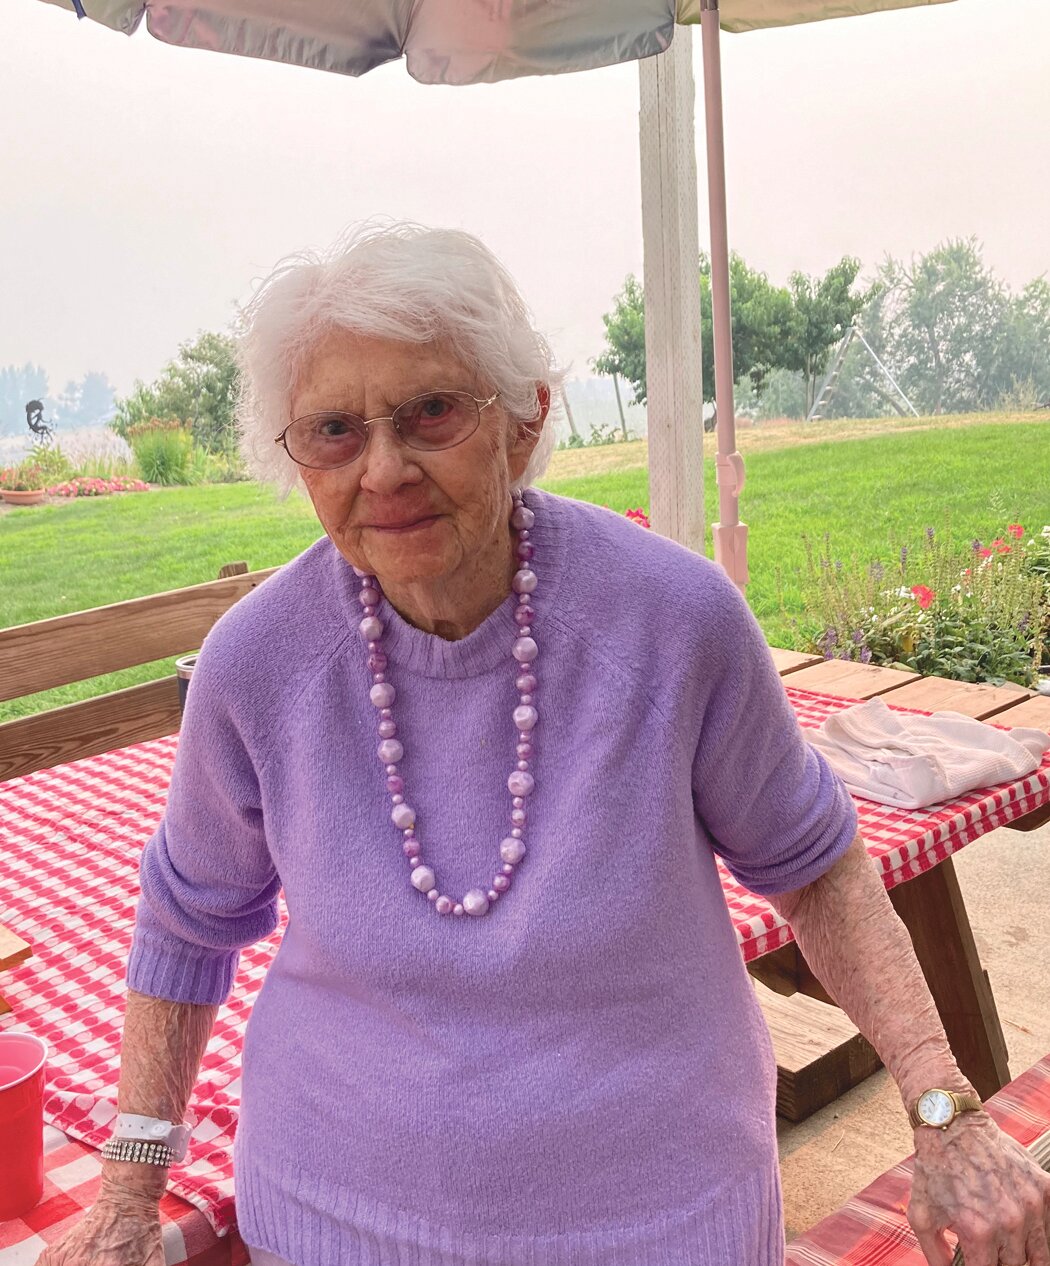 Nola Joyner of Brewster, celebrated her 100th birthday with family and friends and a barbeque at the home of her son Hershal (Karen) Joyner in Manson. She was born August 17, 1922 in Garvin County, Oklahoma. In addition to Hershal, she has a son Roger (Ruth) Joyner of Brewster, and a daughter Gayle Still of Monroe. She has seven grandchildren, 20 great-grandchildren and six great-great-grandchildren.
Submitted Photo